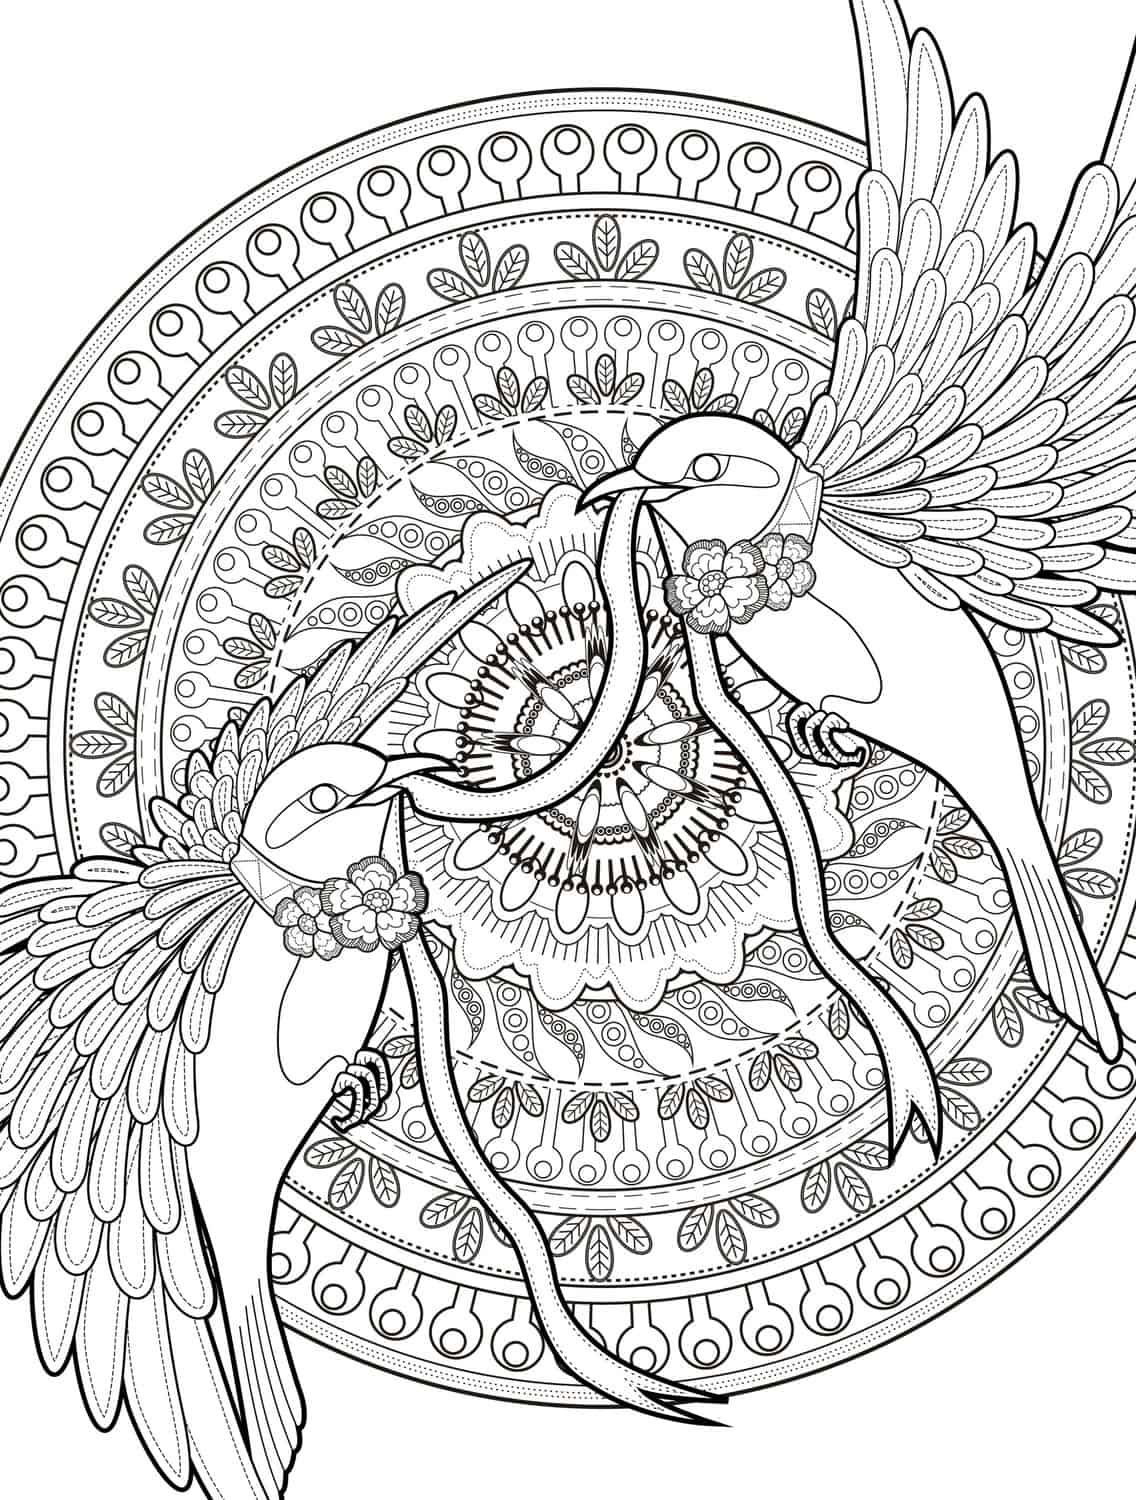 Free Printable Coloring Pages For Adults 2